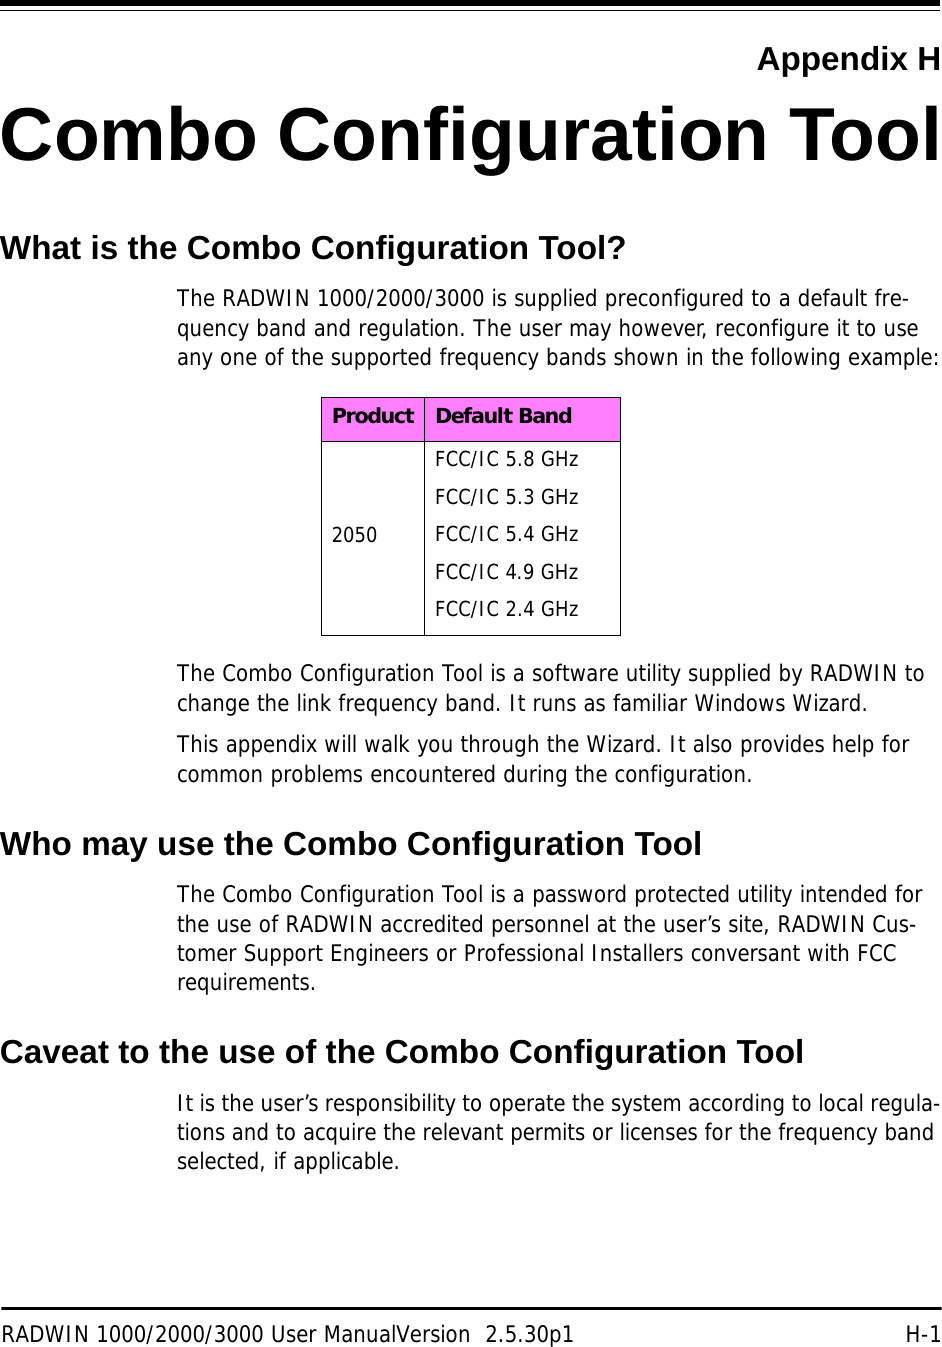 RADWIN 1000/2000/3000 User ManualVersion  2.5.30p1 H-1Appendix HCombo Configuration ToolWhat is the Combo Configuration Tool?The RADWIN 1000/2000/3000 is supplied preconfigured to a default fre-quency band and regulation. The user may however, reconfigure it to use any one of the supported frequency bands shown in the following example:The Combo Configuration Tool is a software utility supplied by RADWIN to change the link frequency band. It runs as familiar Windows Wizard.This appendix will walk you through the Wizard. It also provides help for common problems encountered during the configuration.Who may use the Combo Configuration ToolThe Combo Configuration Tool is a password protected utility intended for the use of RADWIN accredited personnel at the user’s site, RADWIN Cus-tomer Support Engineers or Professional Installers conversant with FCC requirements.Caveat to the use of the Combo Configuration ToolIt is the user’s responsibility to operate the system according to local regula-tions and to acquire the relevant permits or licenses for the frequency band selected, if applicable.Product Default Band2050FCC/IC 5.8 GHzFCC/IC 5.3 GHzFCC/IC 5.4 GHzFCC/IC 4.9 GHzFCC/IC 2.4 GHz